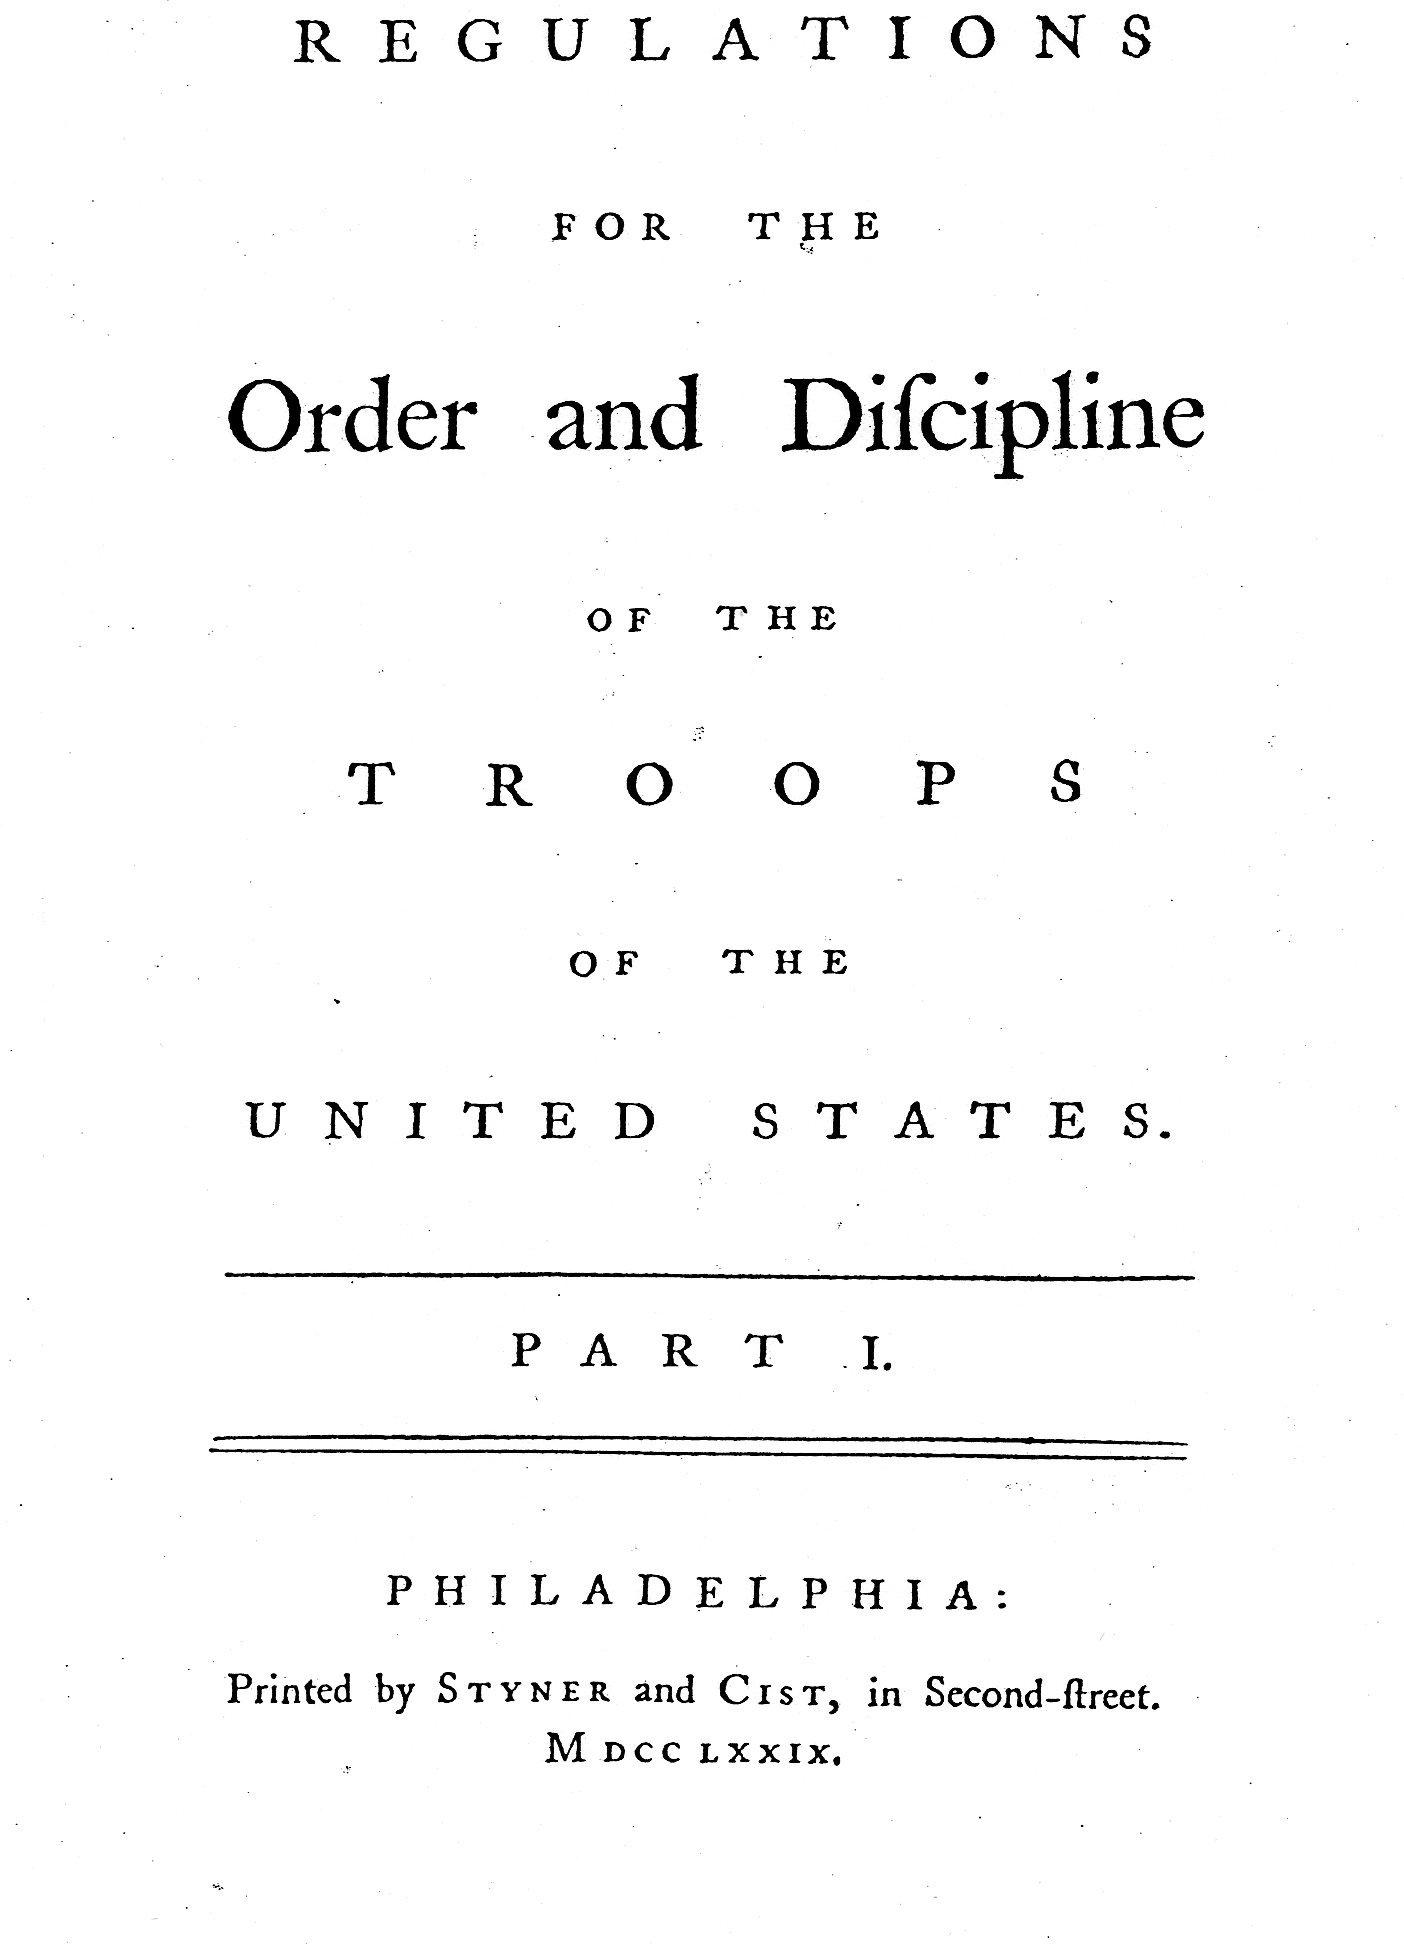 Regulation for the Order and Discipline of the Troops of the United States, Philadelphia, 1779 1